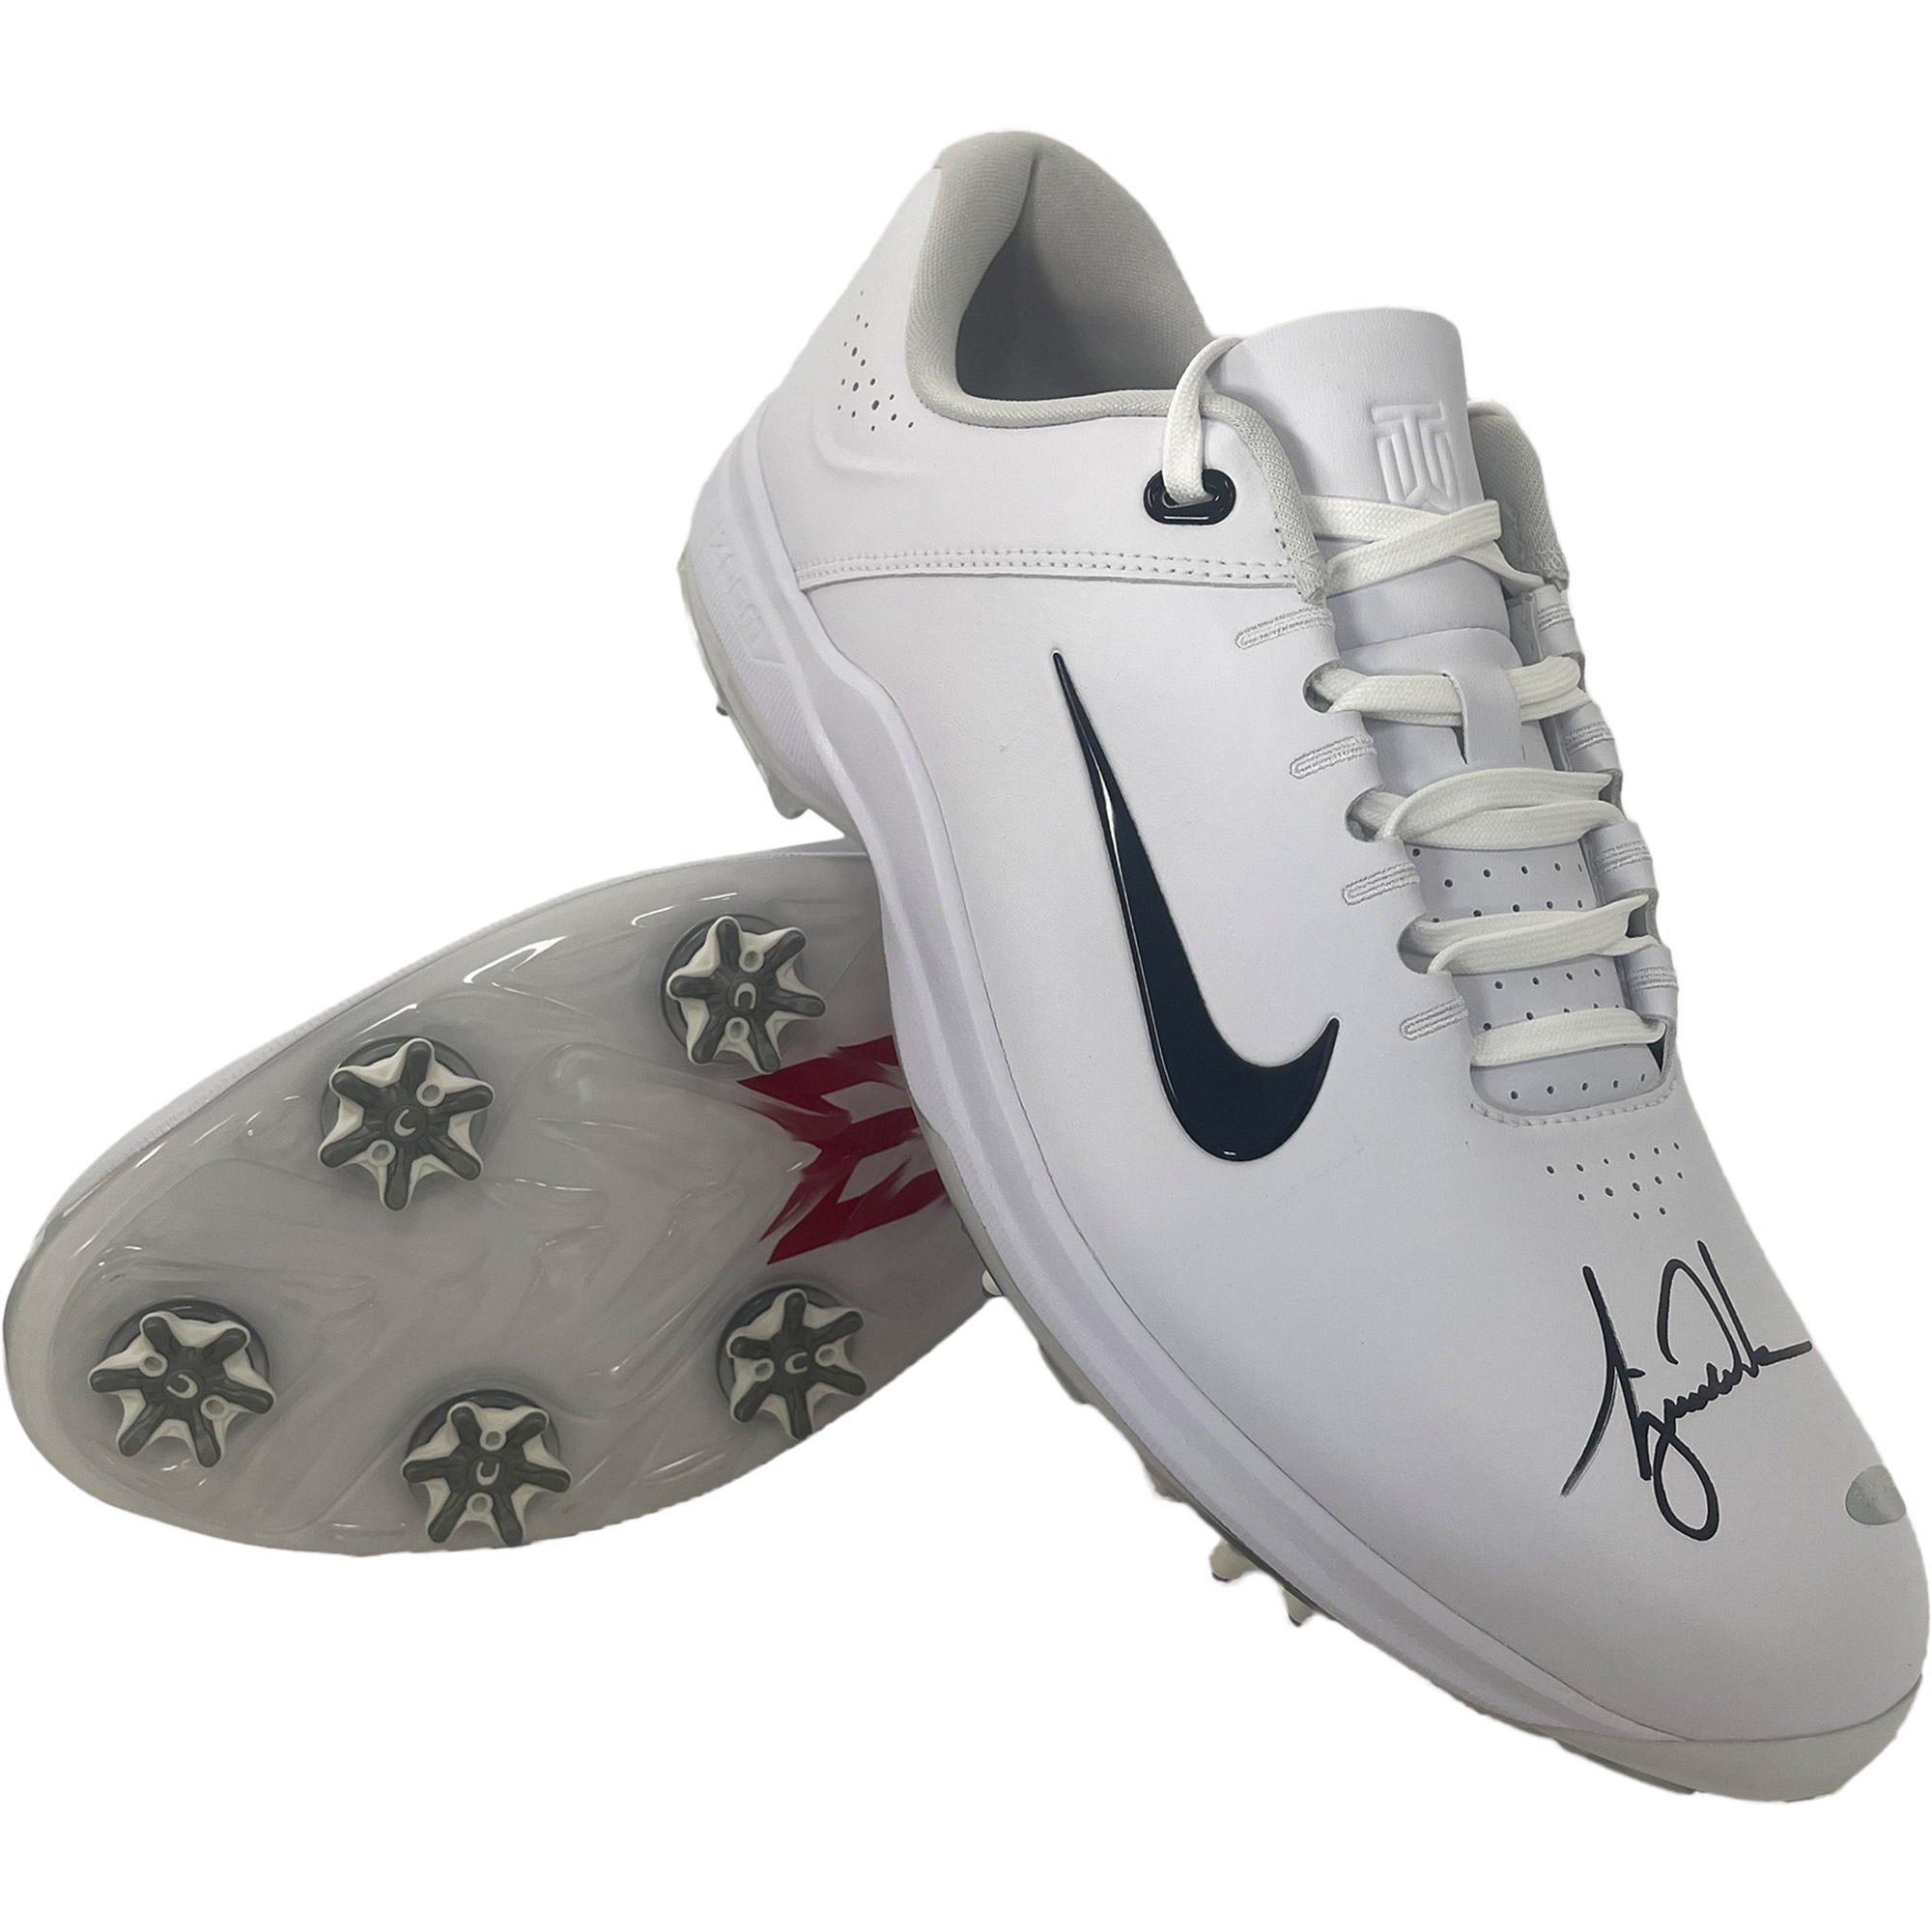 Golf – Tiger Woods Signed Pair of Nike Golf Shoes (Upper Deck CO...